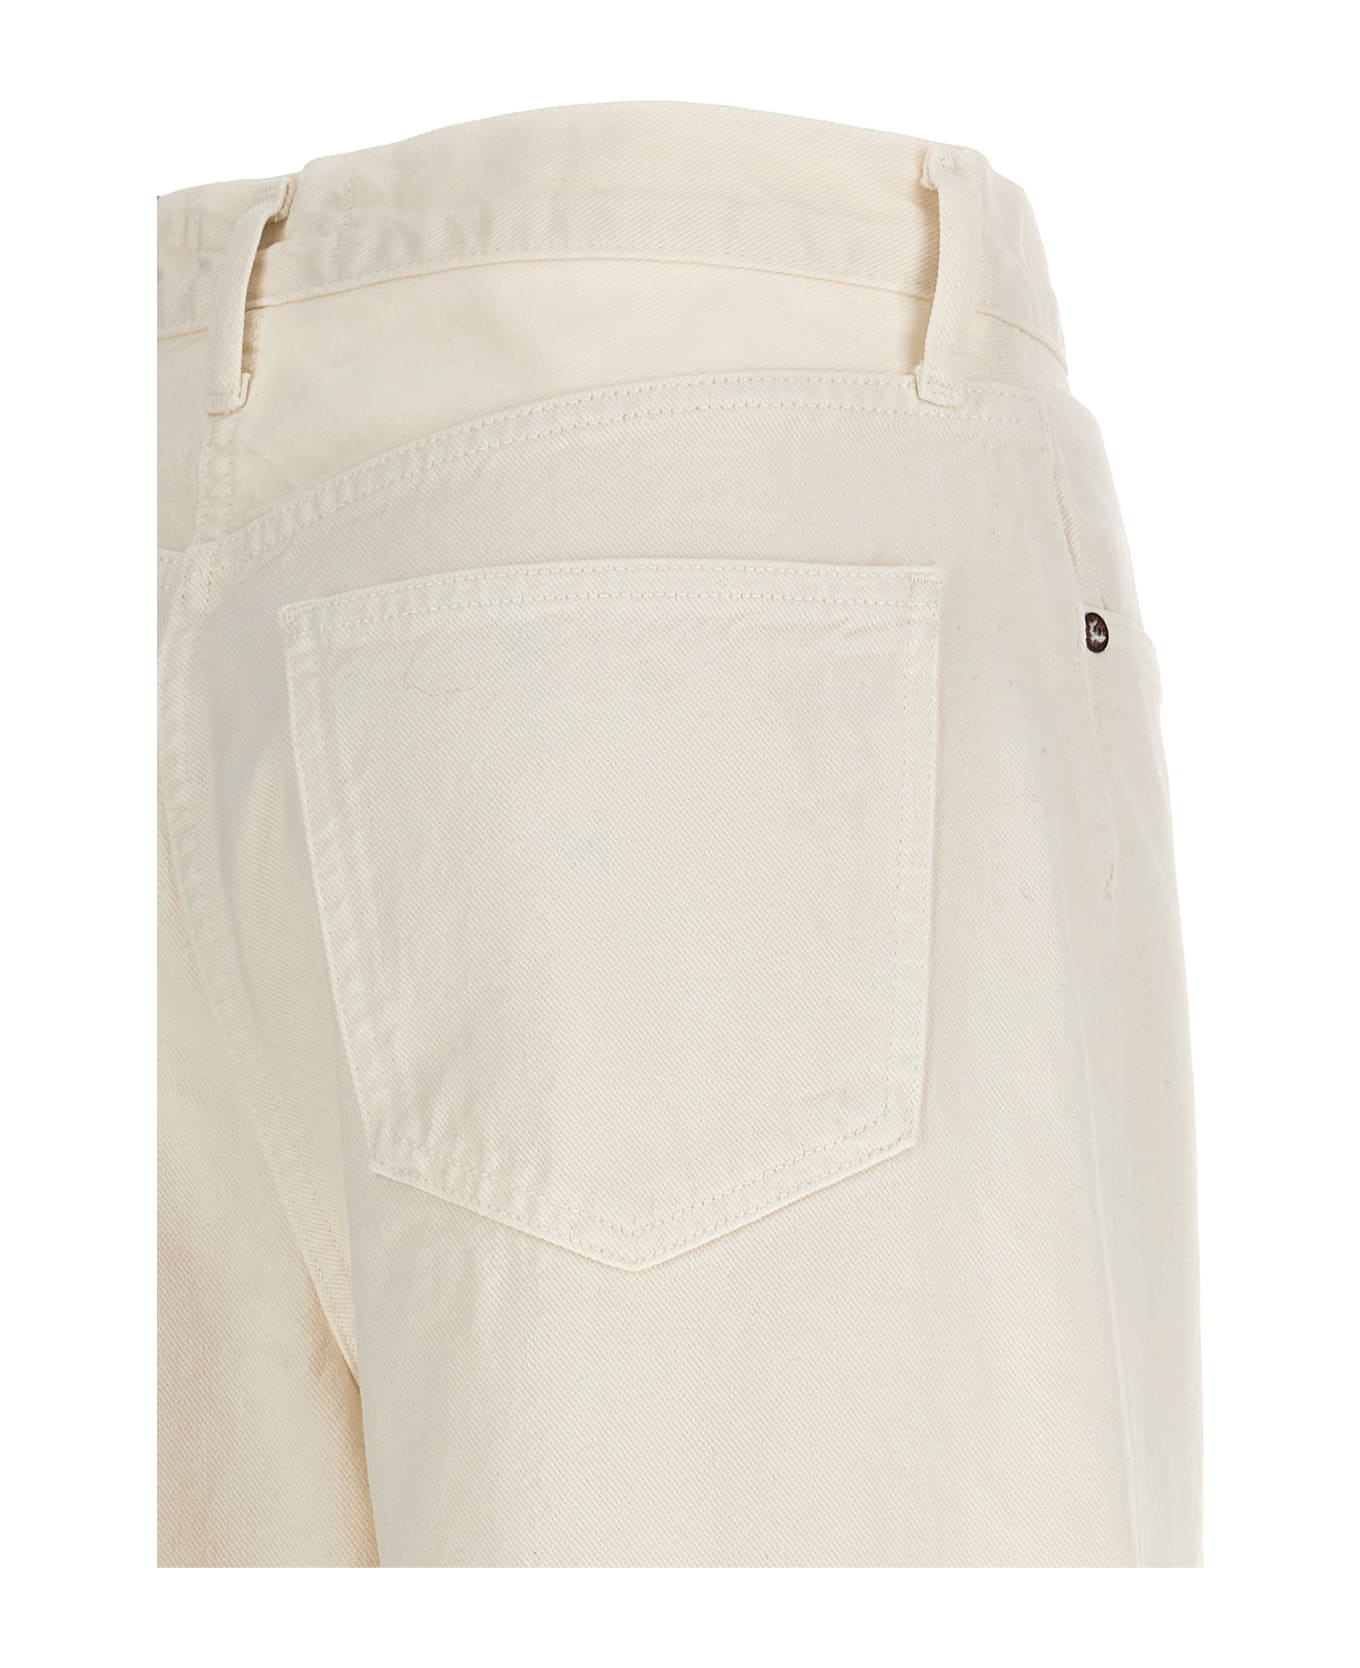 AGOLDE 'dame' Jeans - White